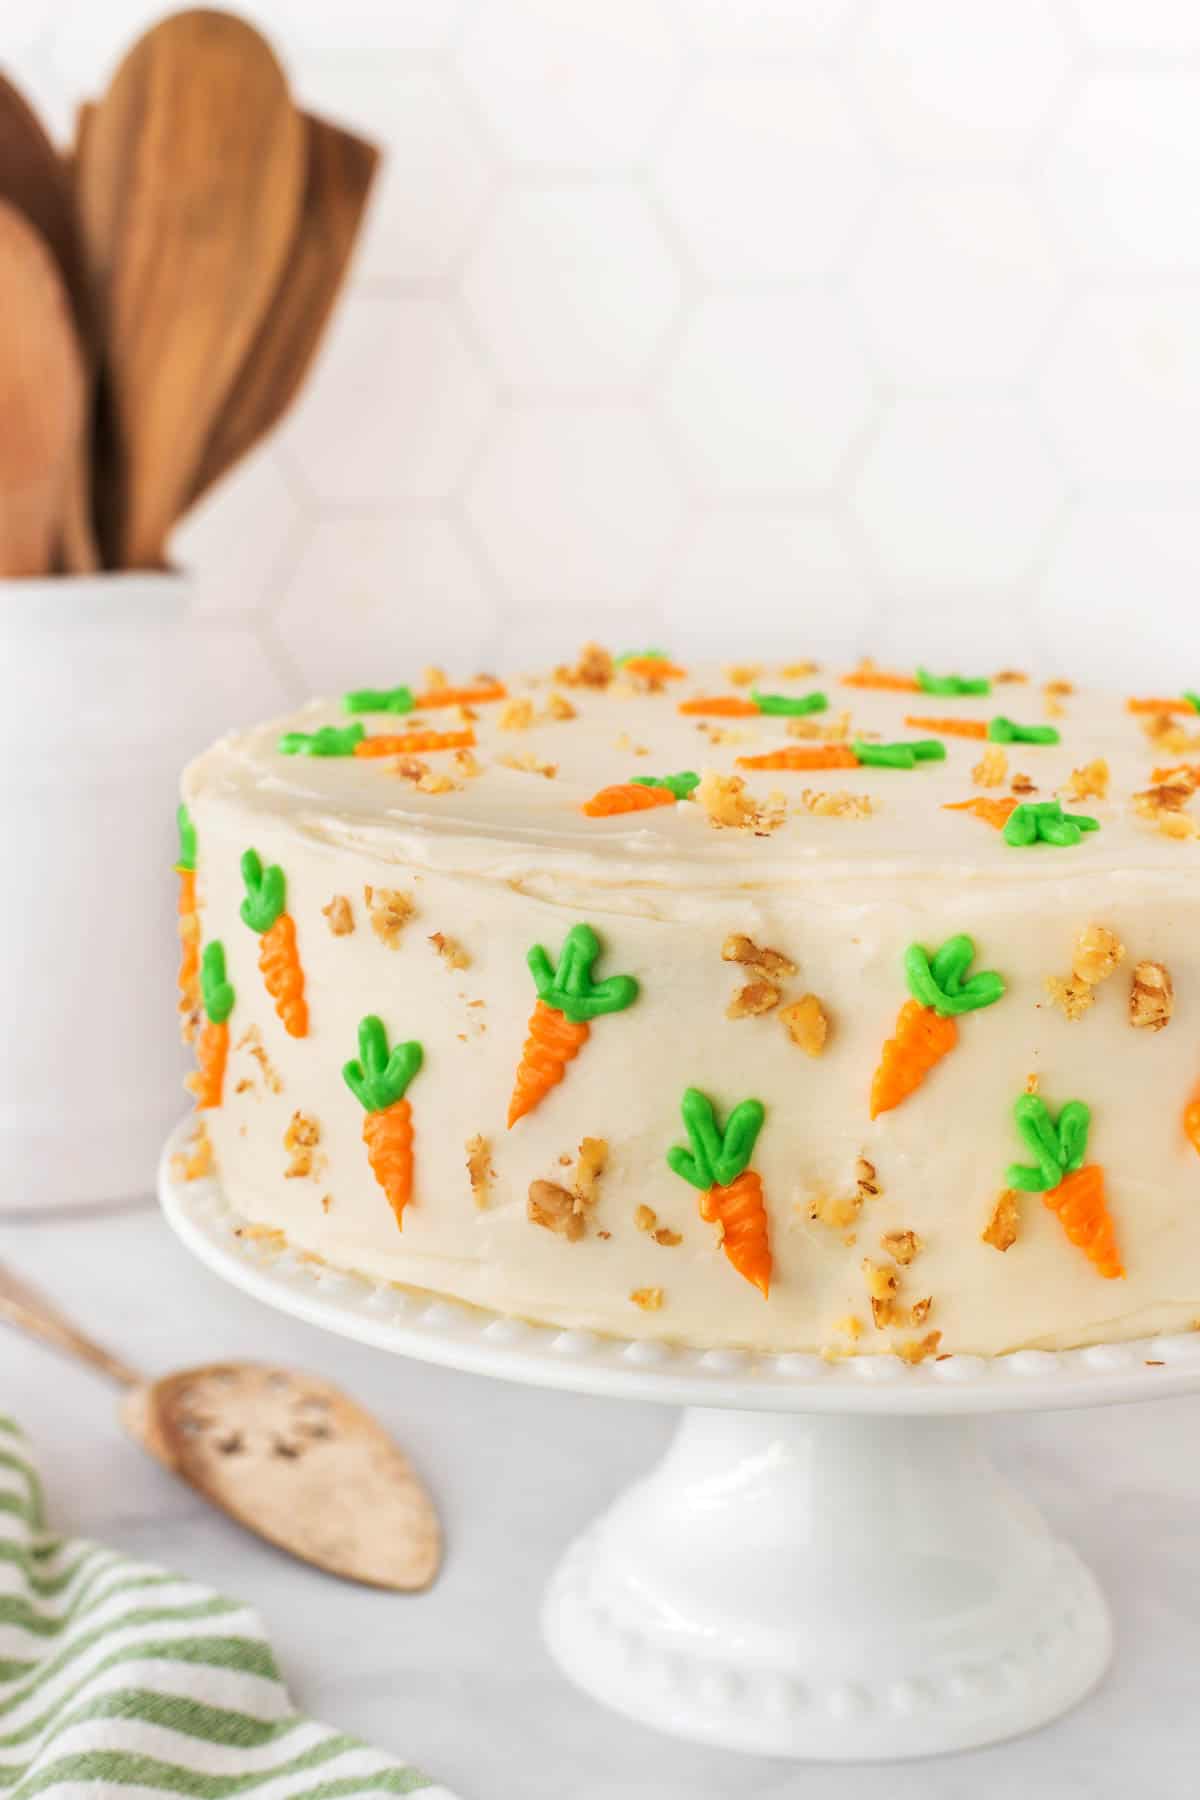 Finished Best Carrot Cake Recipe on a cake stand